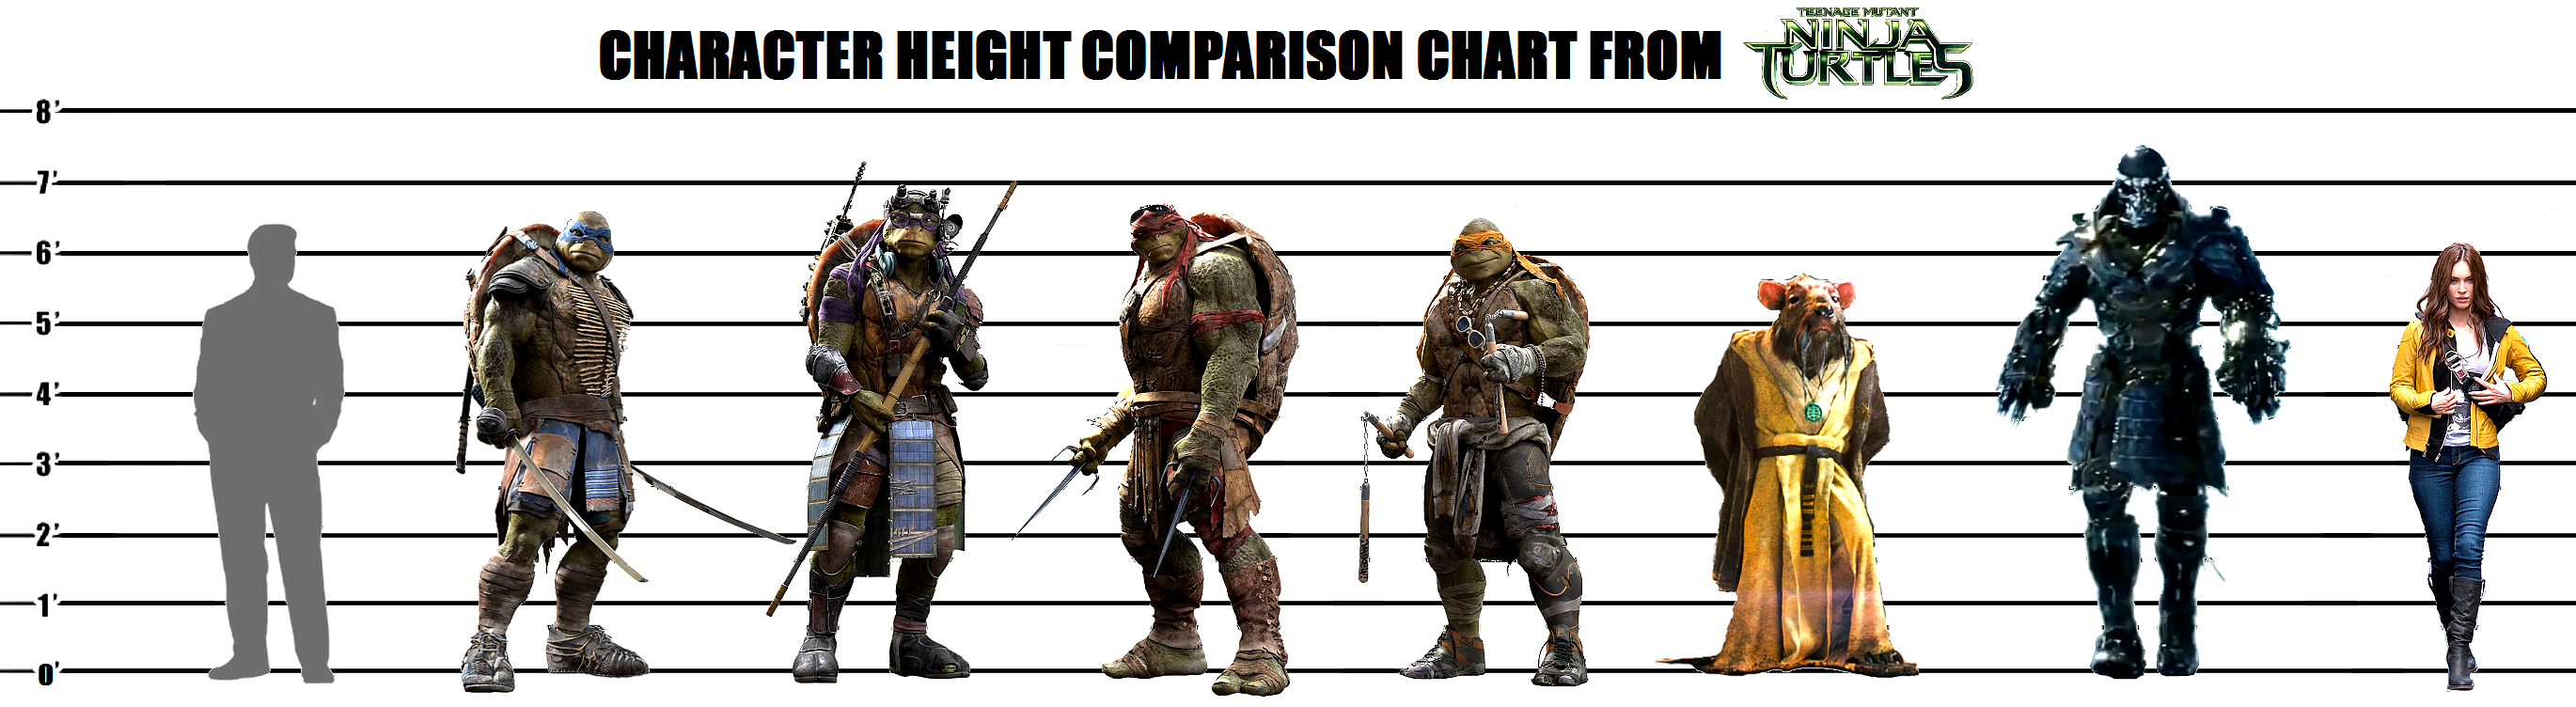 tmnt__2014__character_height_chart_by_homey104-d8ldr85.png